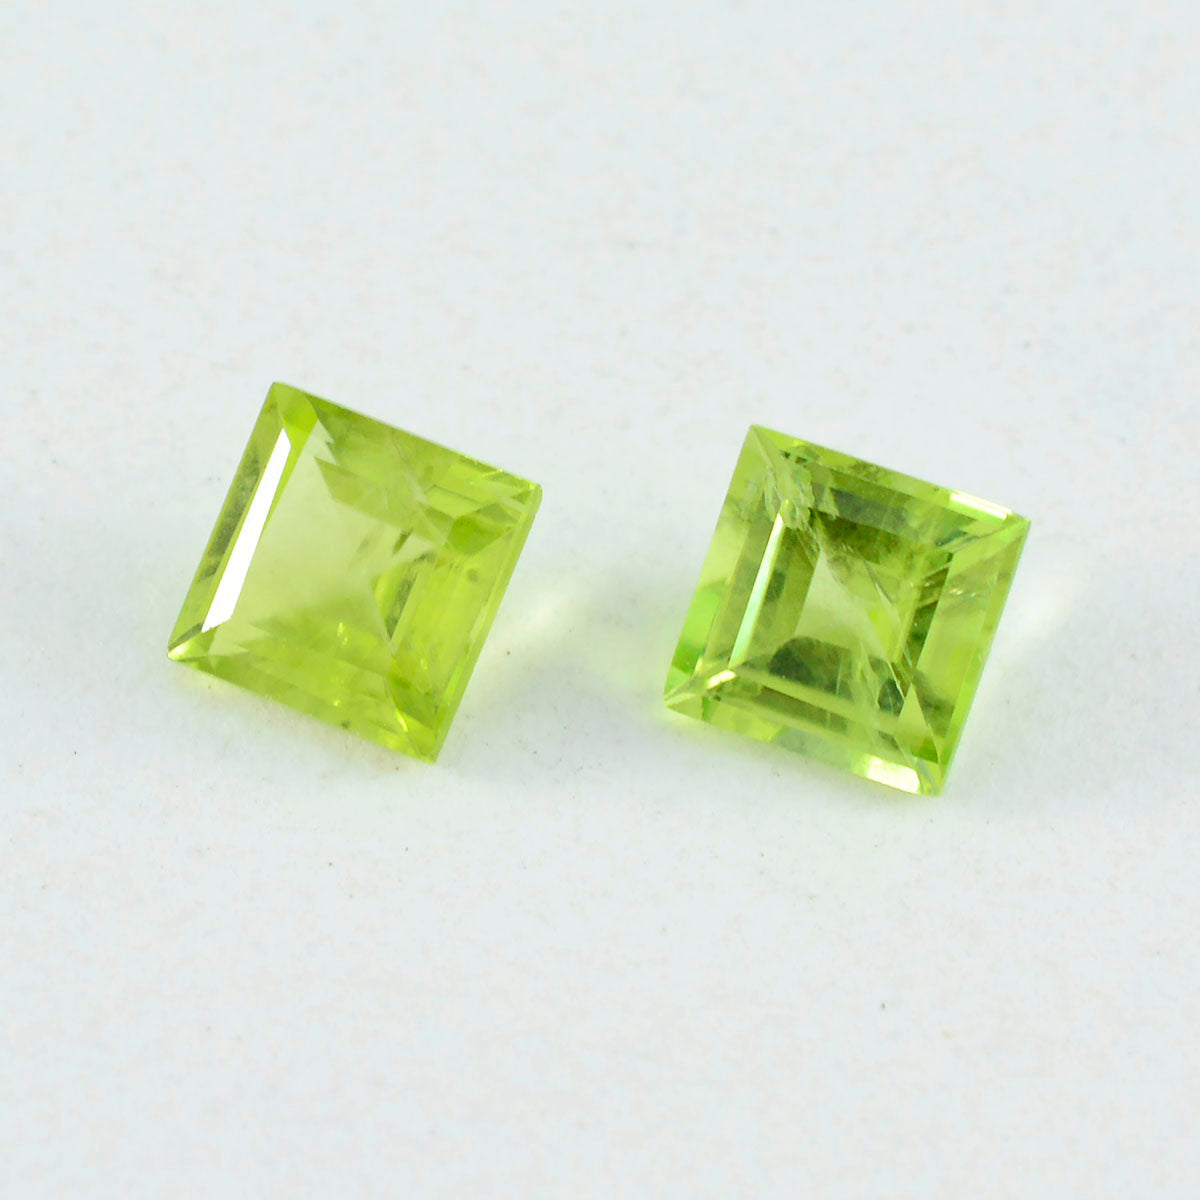 Riyogems 1PC Natural Green Peridot Faceted 10x10 mm Square Shape handsome Quality Loose Gem